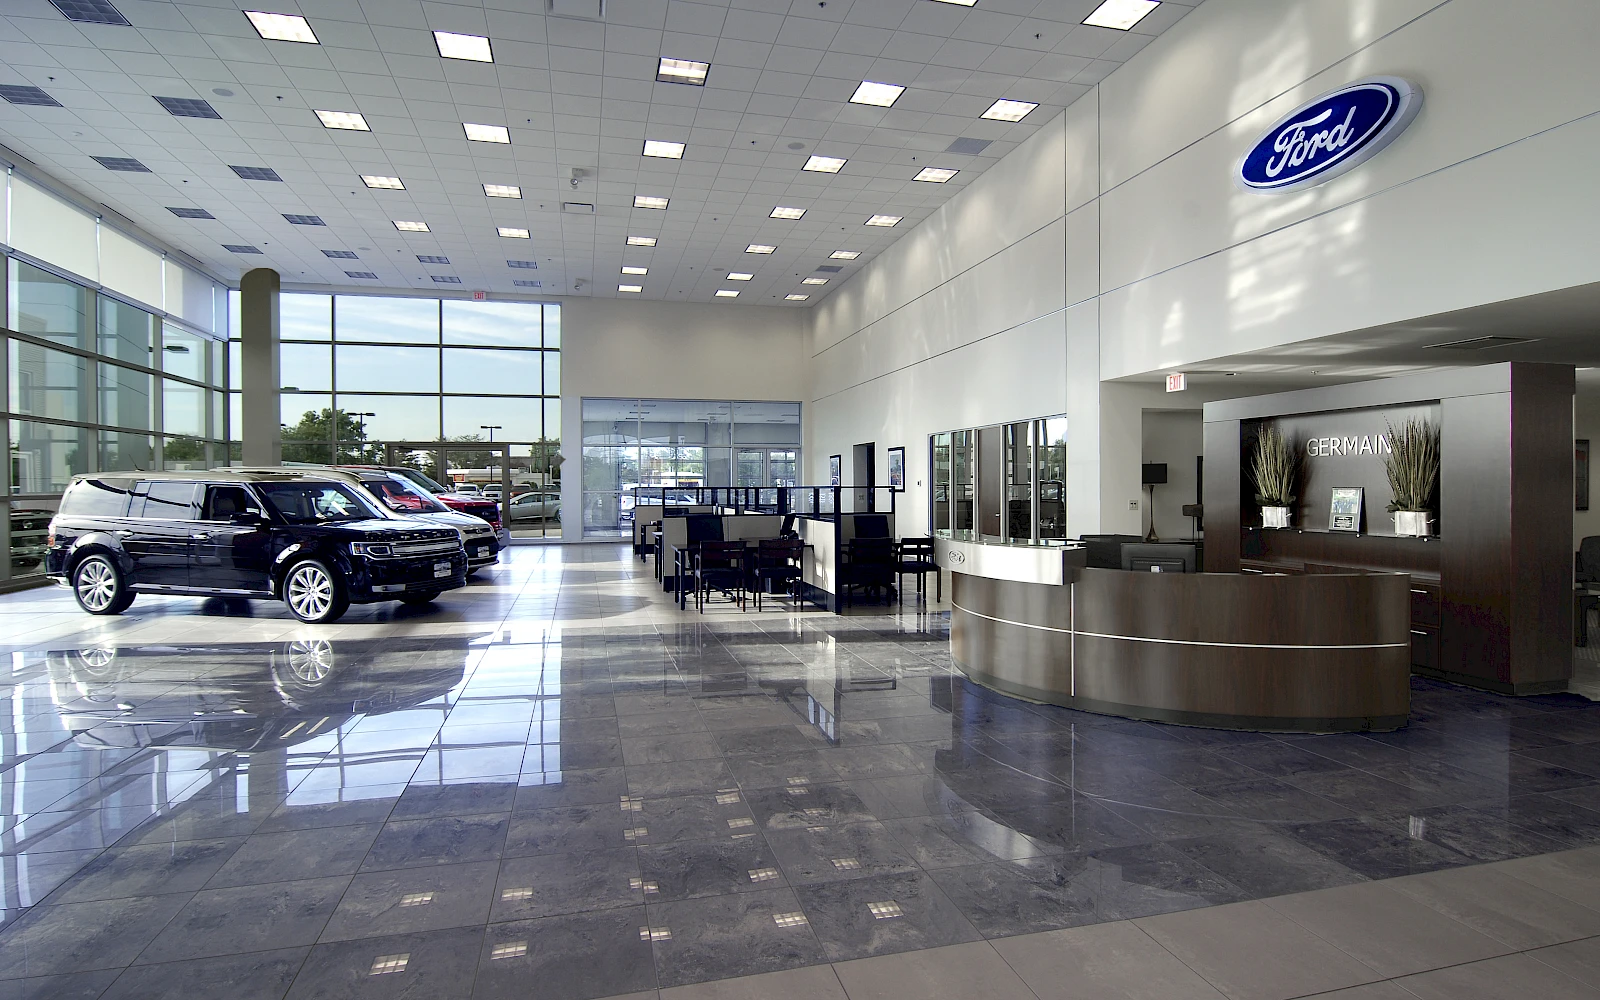 Germain Ford auto dealership construction finished picture 5